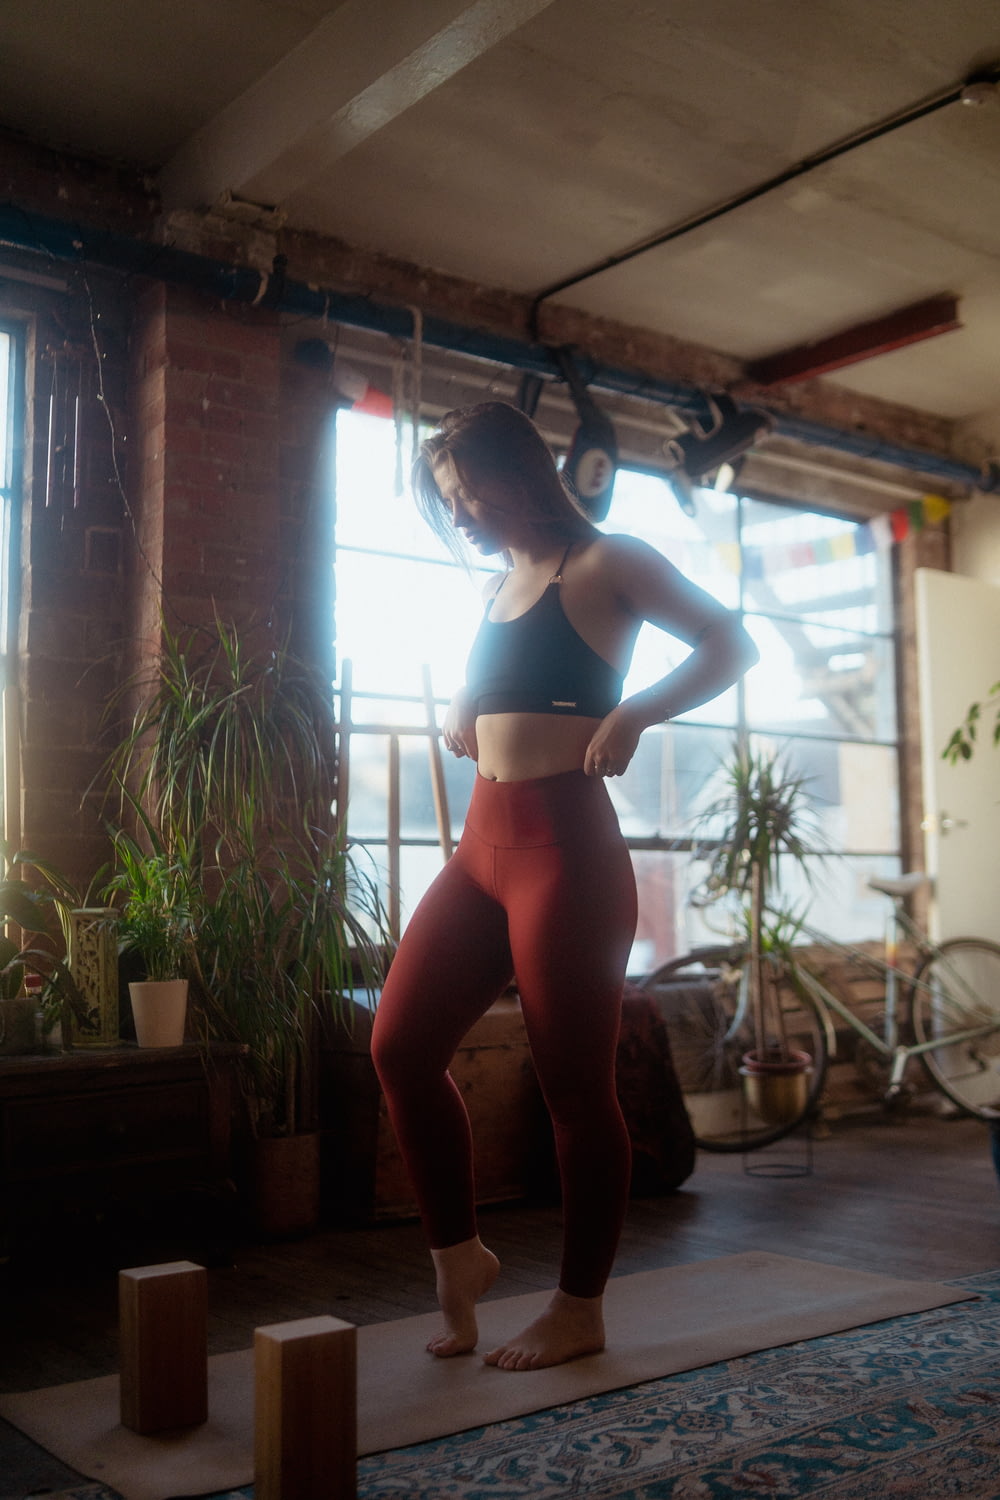 a woman standing on a yoga mat in front of a window